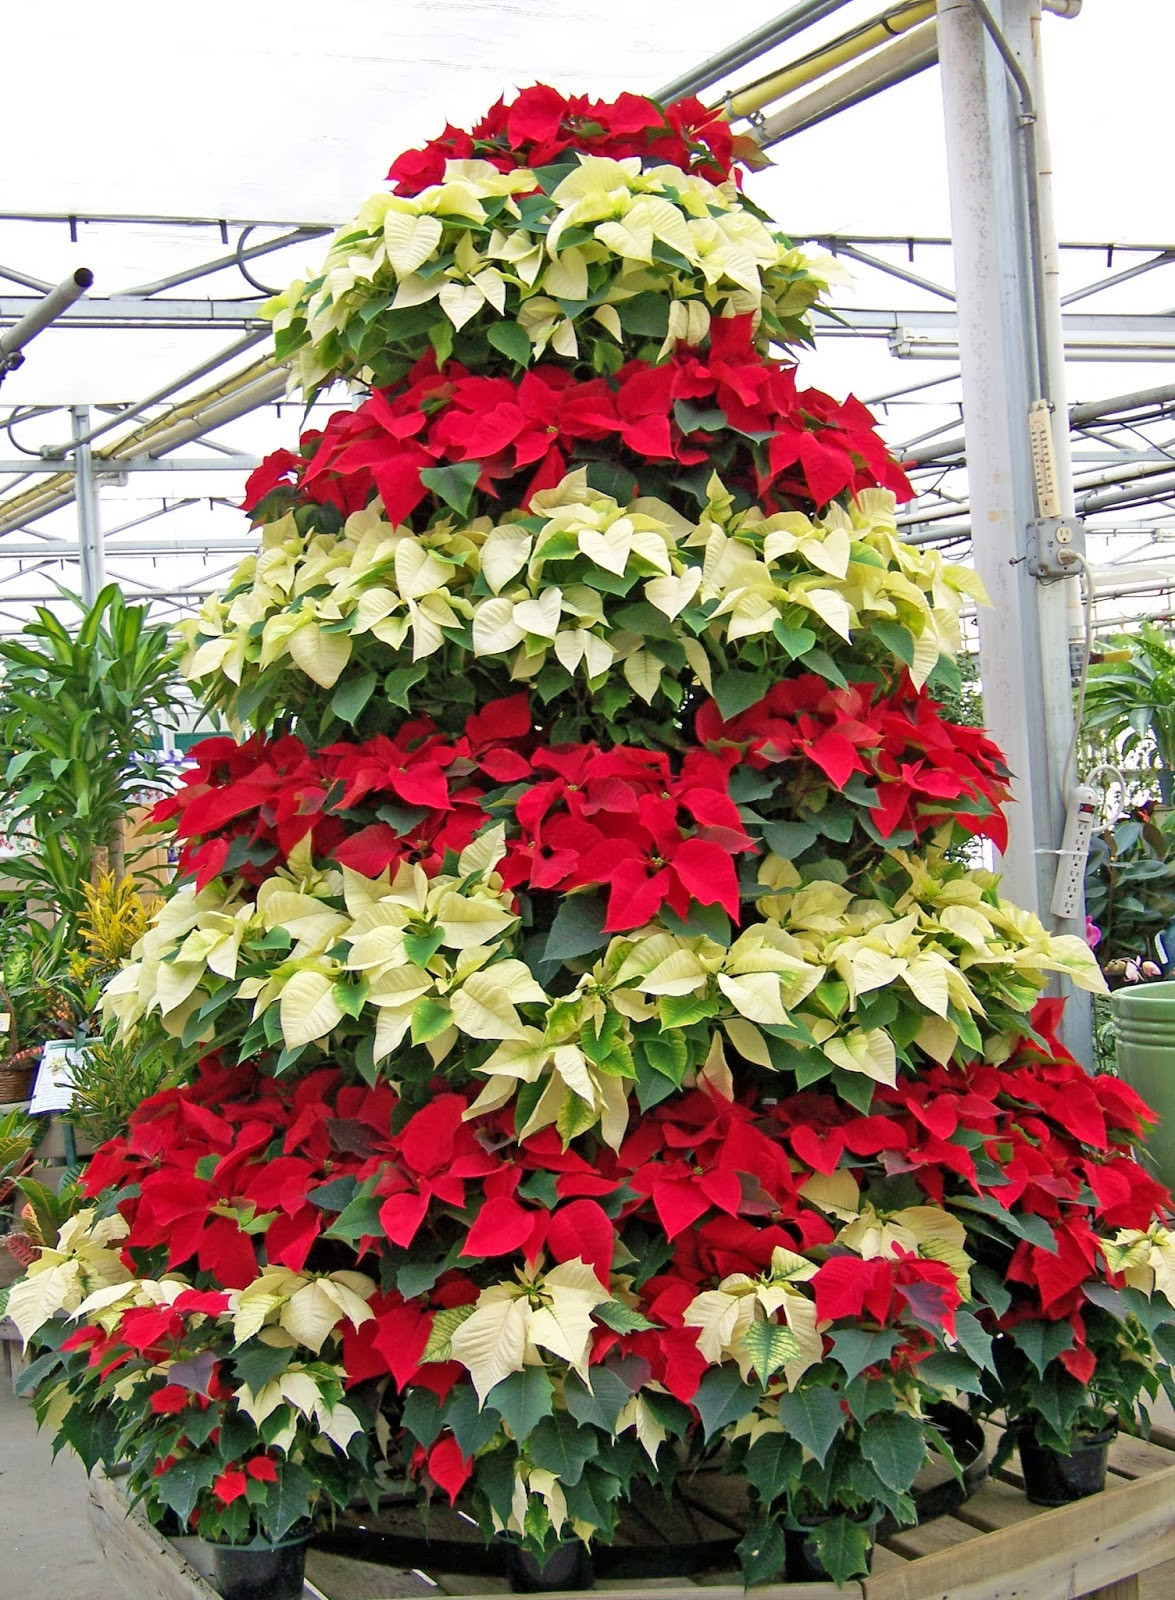 Poinsettia Christmas Flower
 Decorating Your Home for Christmas